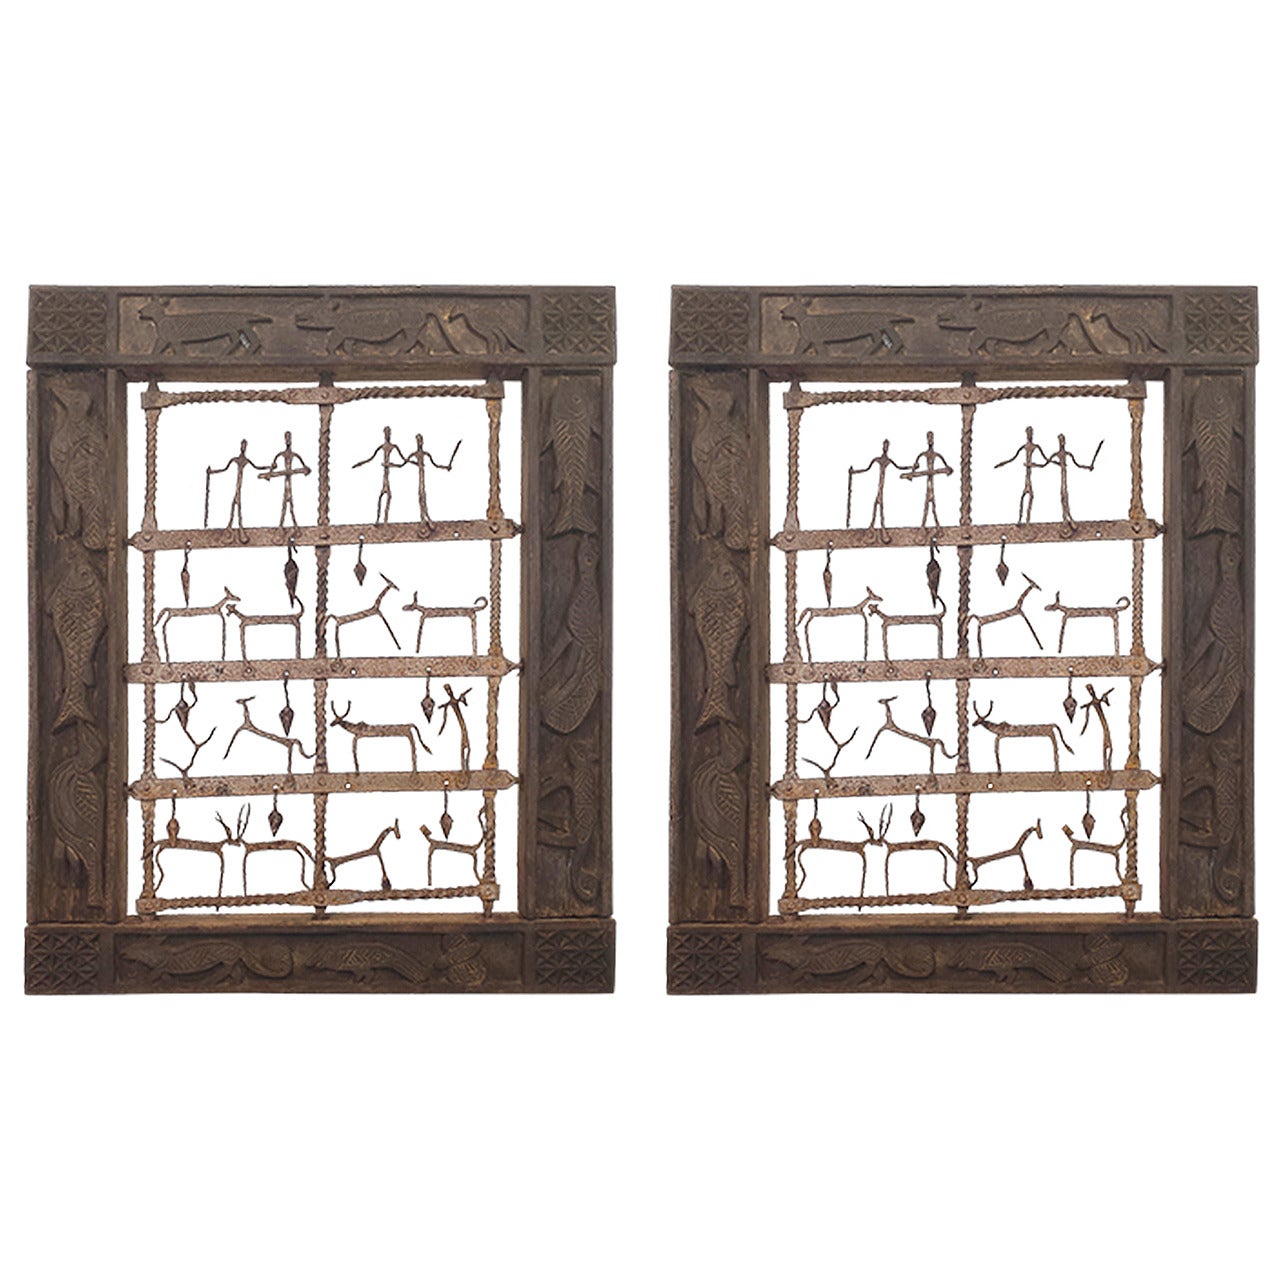 Ethnographic Pair of Wood Carved Animals Wall Panel with Metal Animals & Figures For Sale